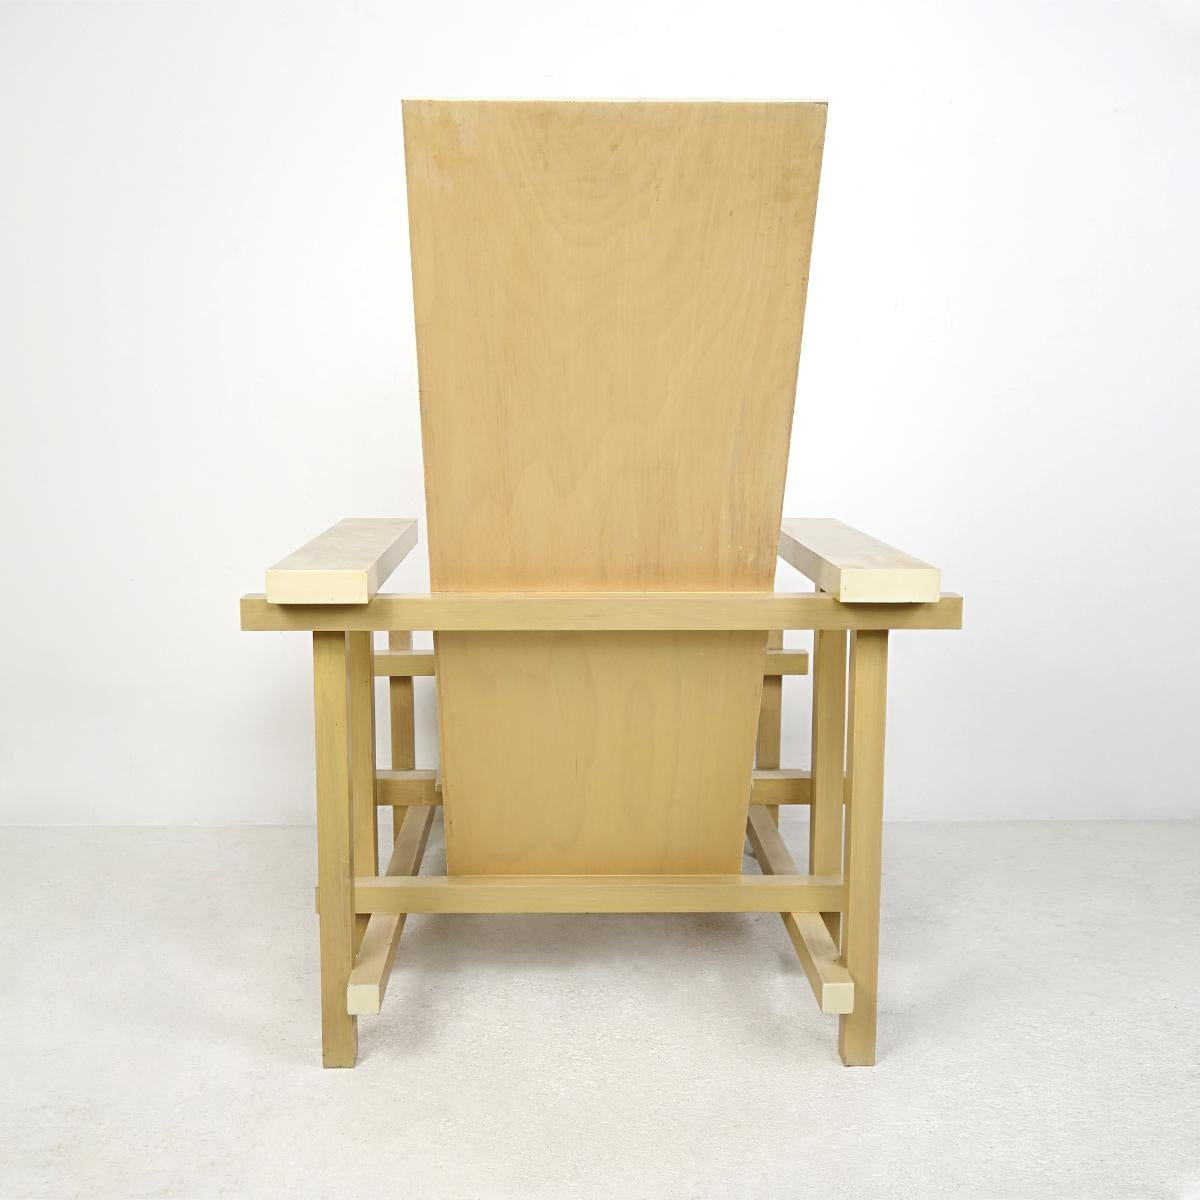 20th Century Modernist Chair Made of Uncolored Lacquered Wood after Gerrit Rietveld's Design